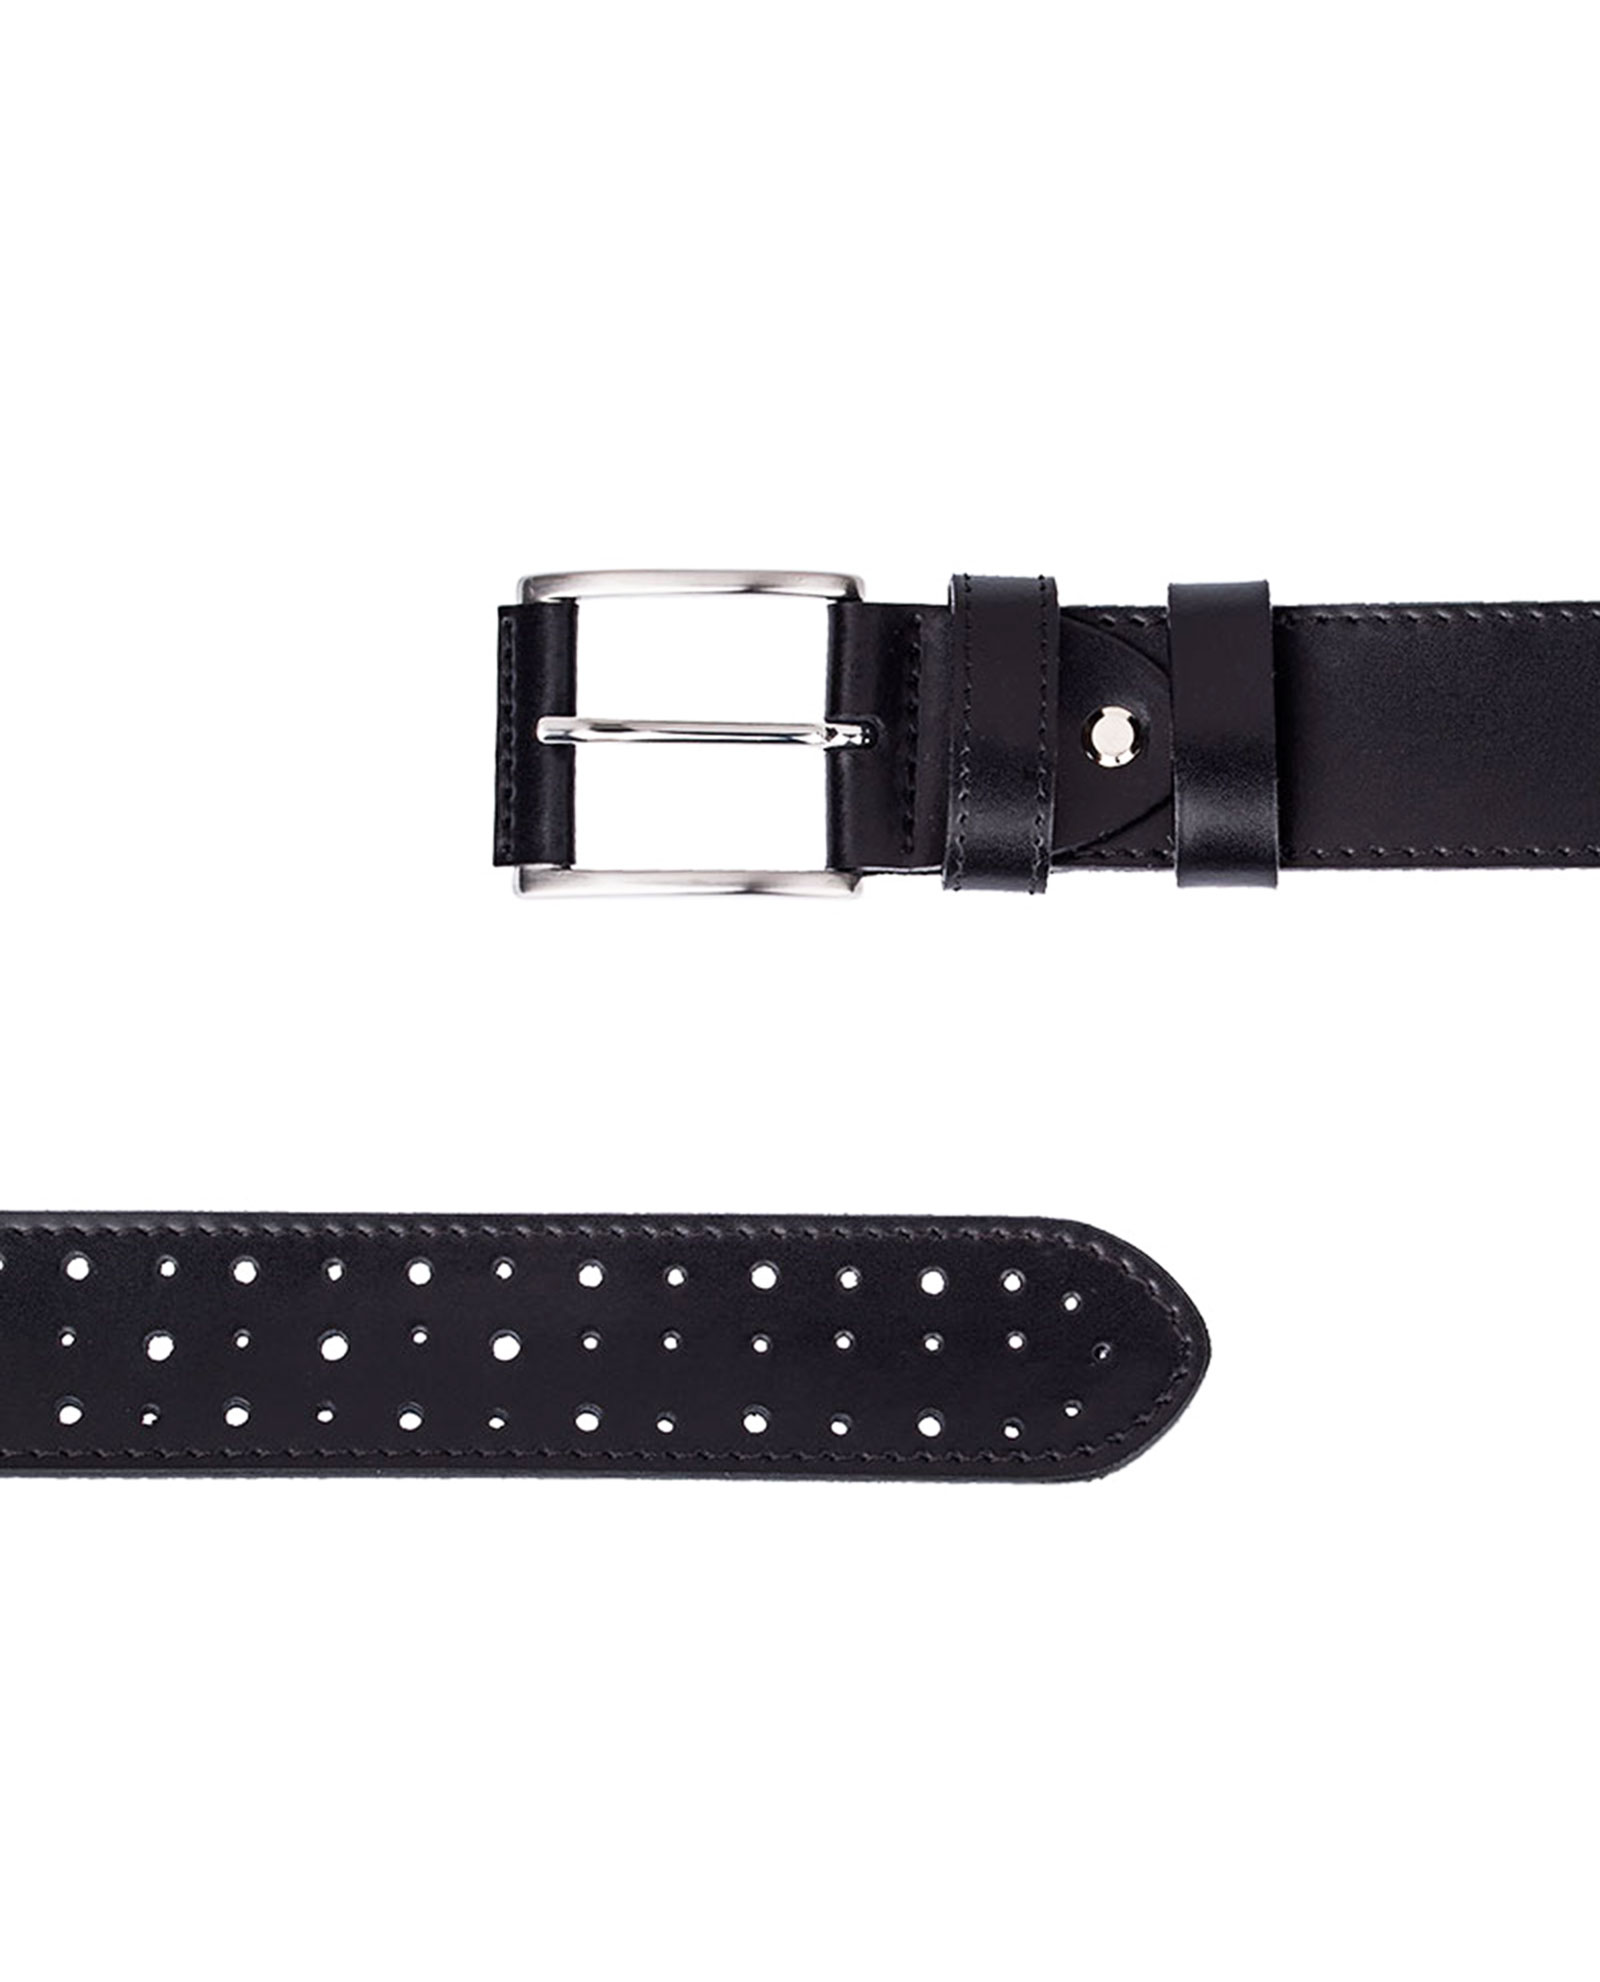 Buy Men's Casual Belt | Black Perforated Leather | Free Shipping